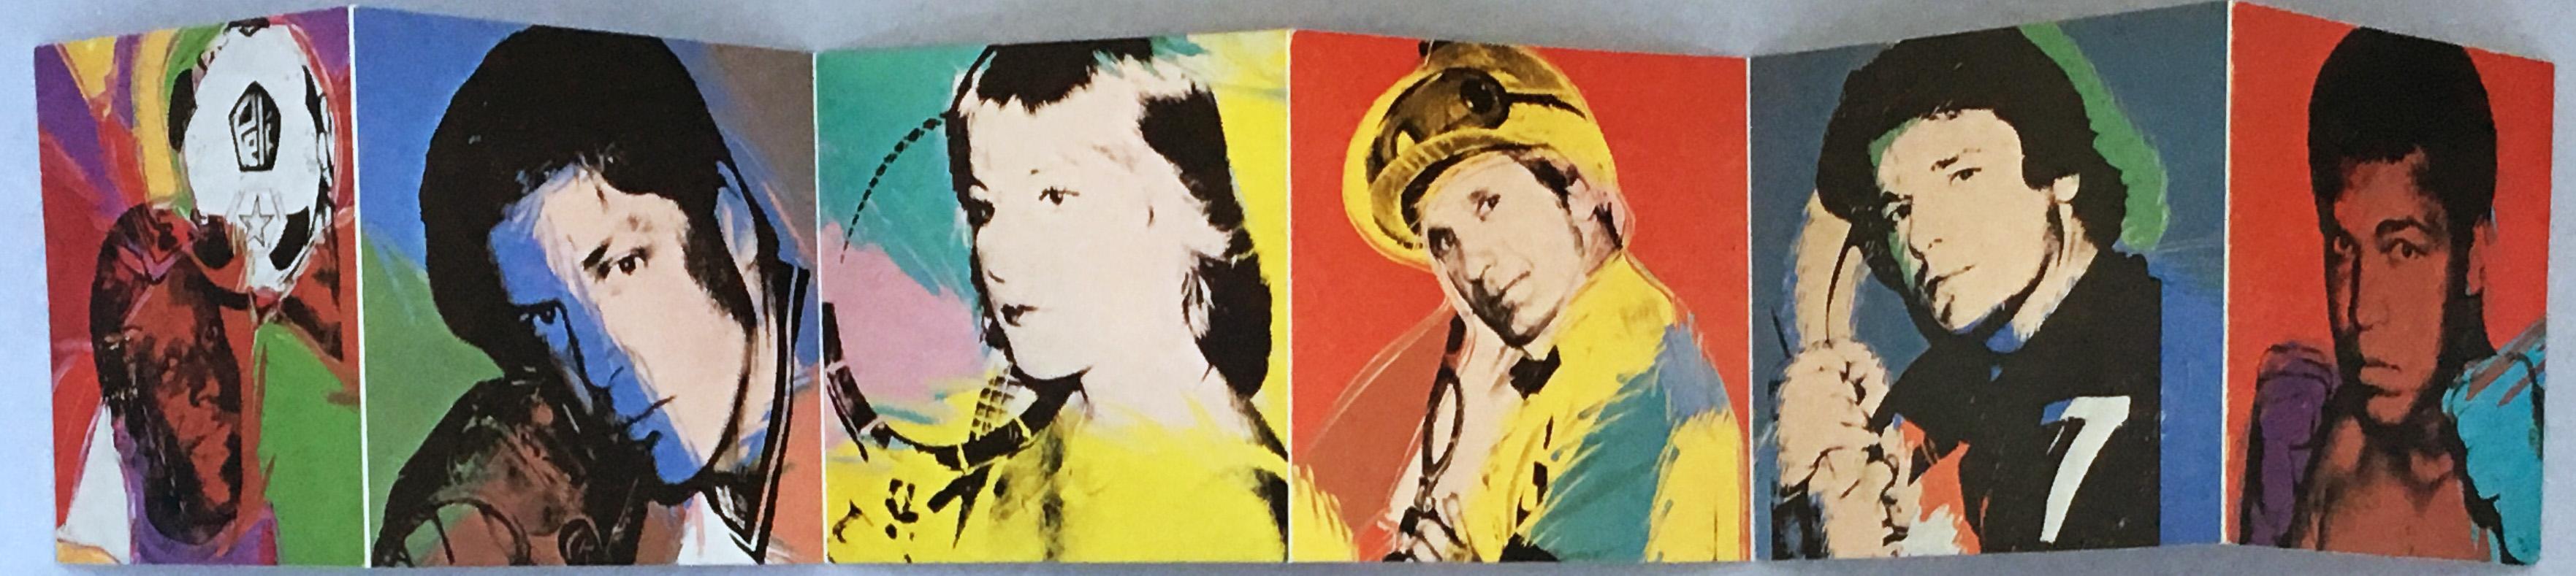 Warhol Athletes Series (1970s announcement)  - Pop Art Art by (after) Andy Warhol